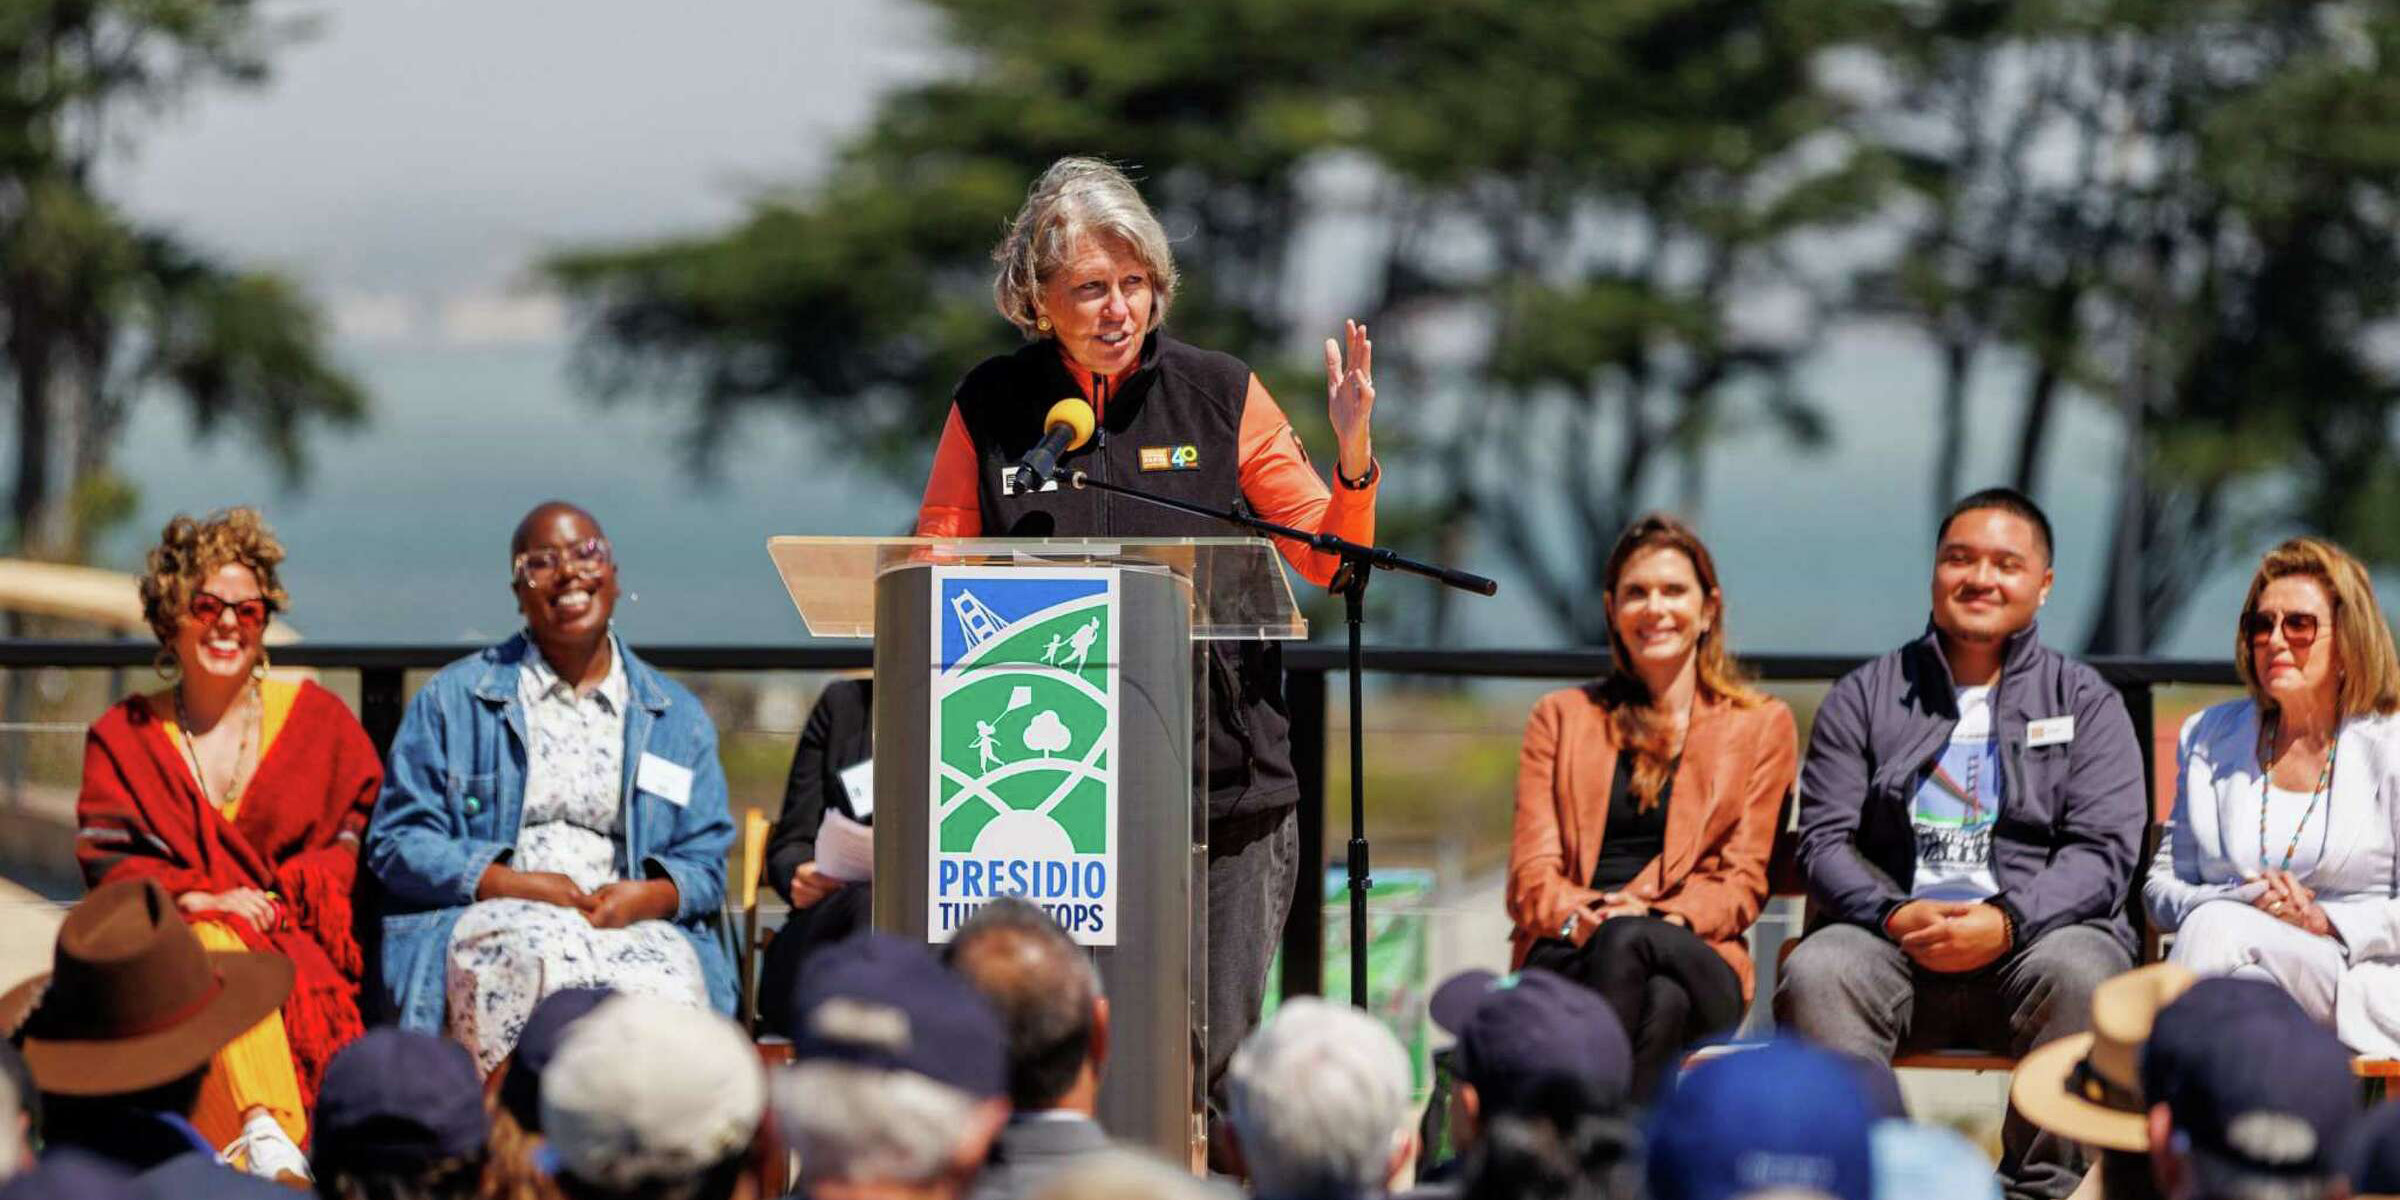 Christine Lehnertz, president and CEO of the Golden Gate National Parks Conservancy, speaks at the ribbon cutting ceremony for the Presidio Tunnel Tops.